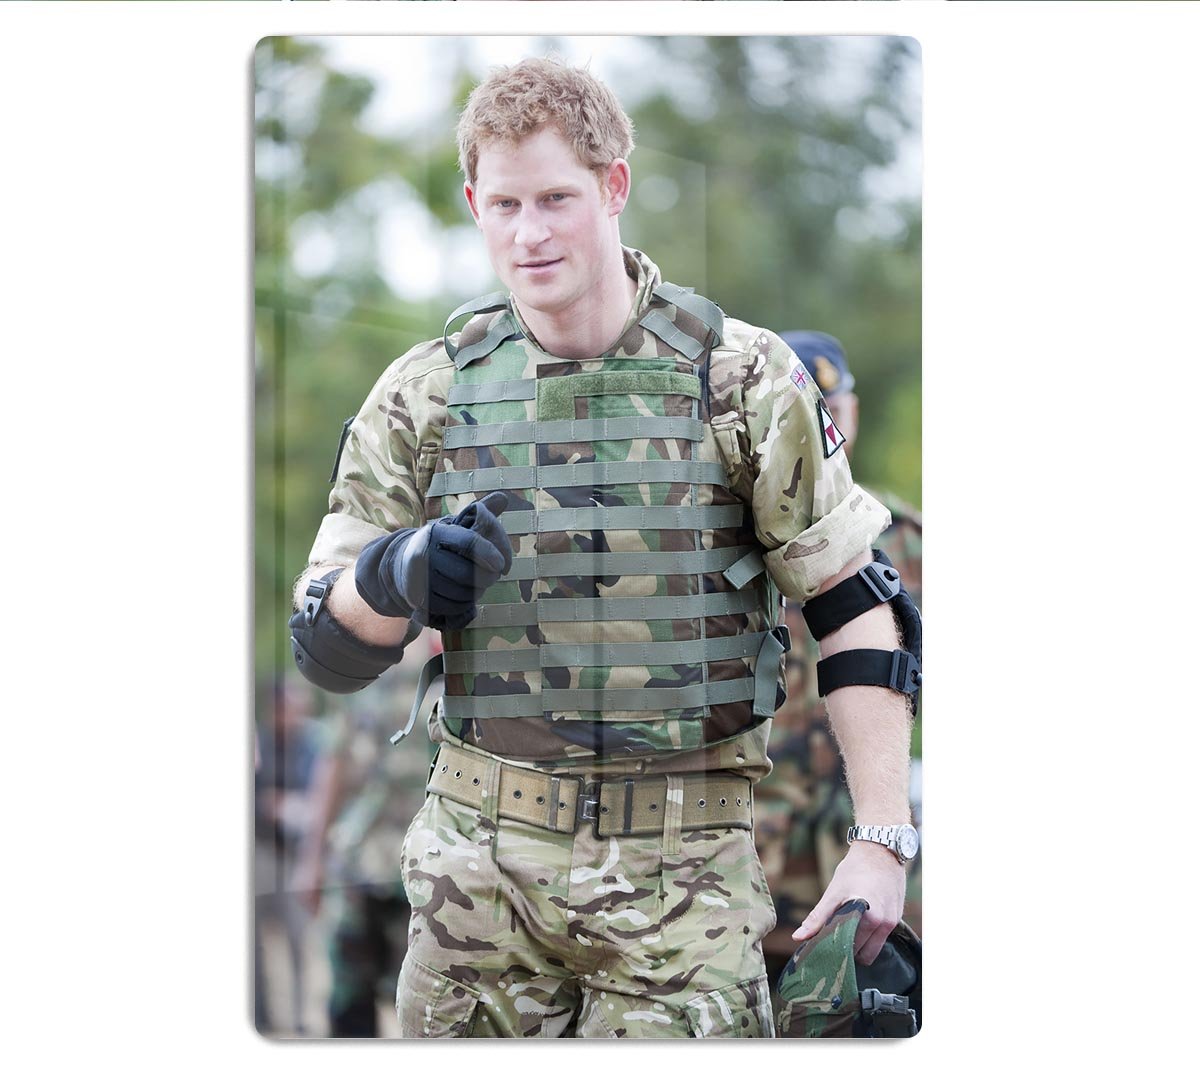 Prince Harry at the Jamaican Defence Force in Jamaica HD Metal Print